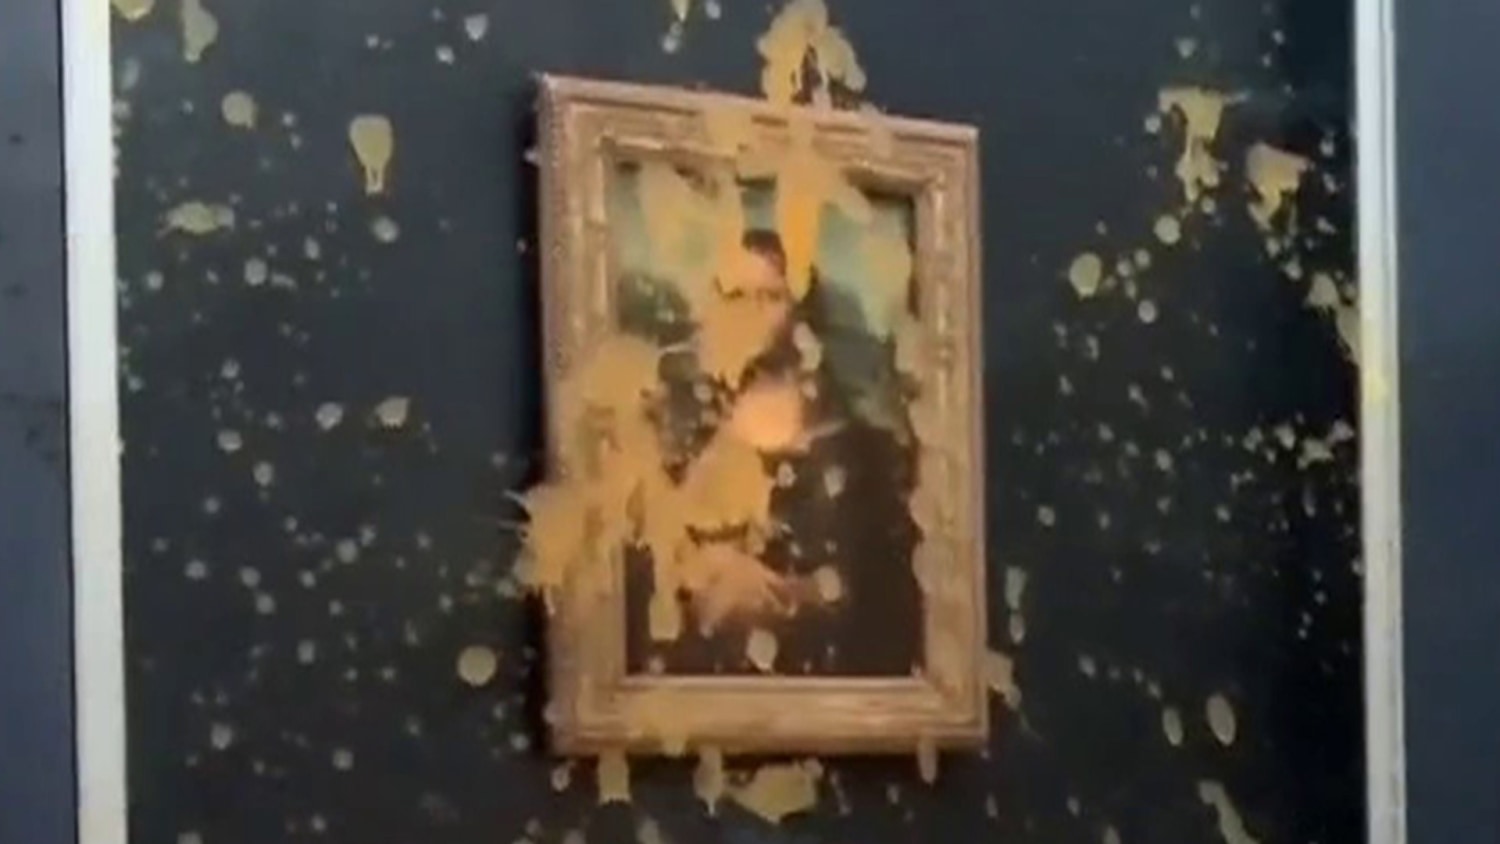 Climate activists throw soup on glass-covered 'Mona Lisa' painting